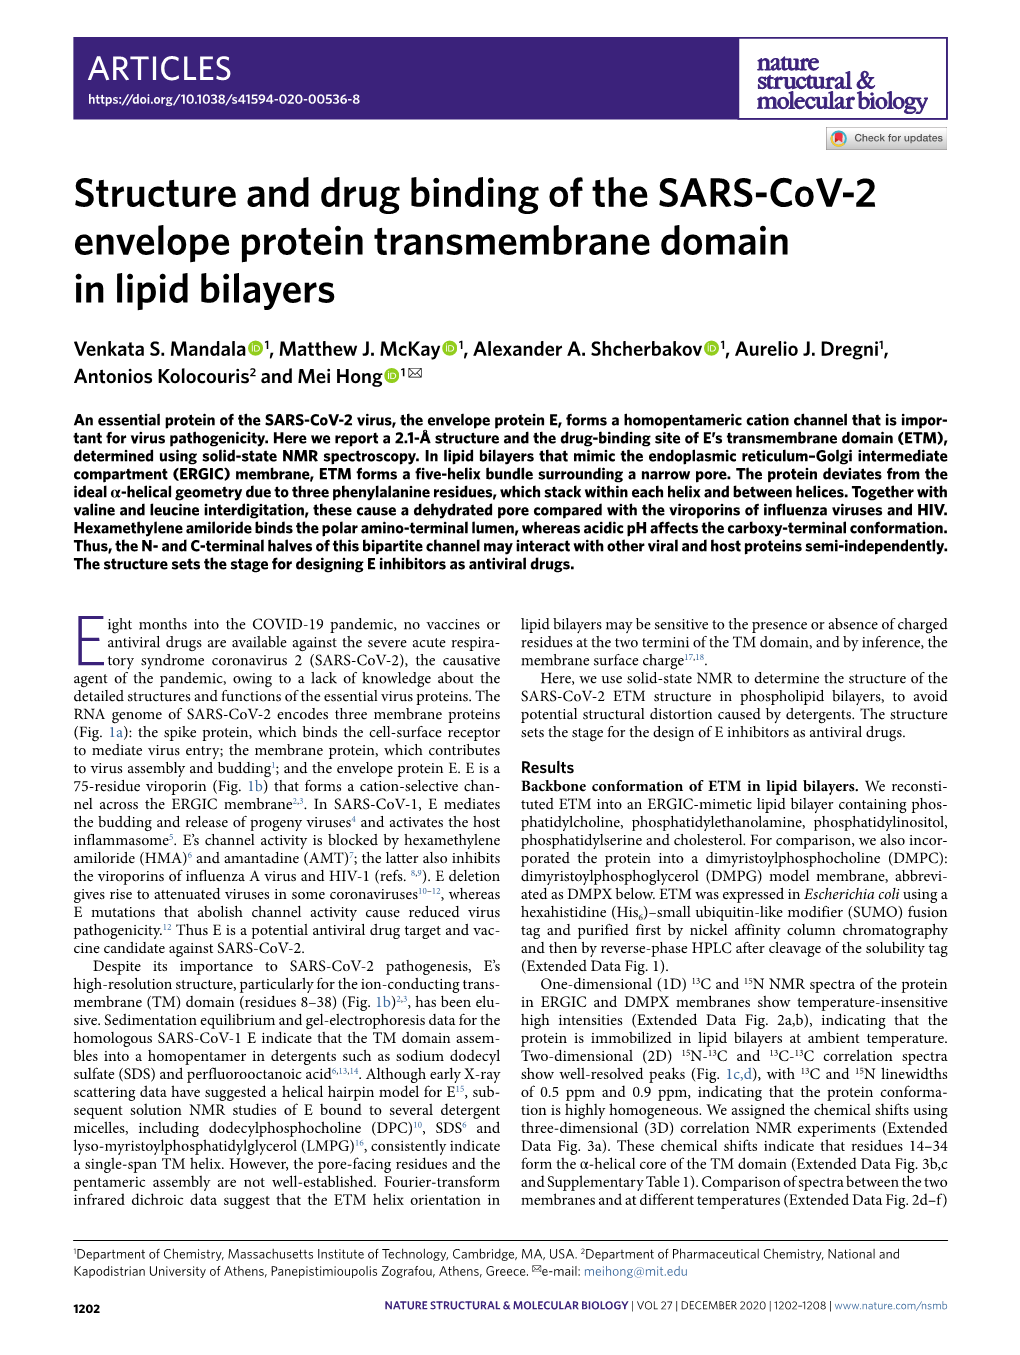 Structure and Drug Binding of the SARS-Cov-2 Envelope Protein Transmembrane Domain in Lipid Bilayers